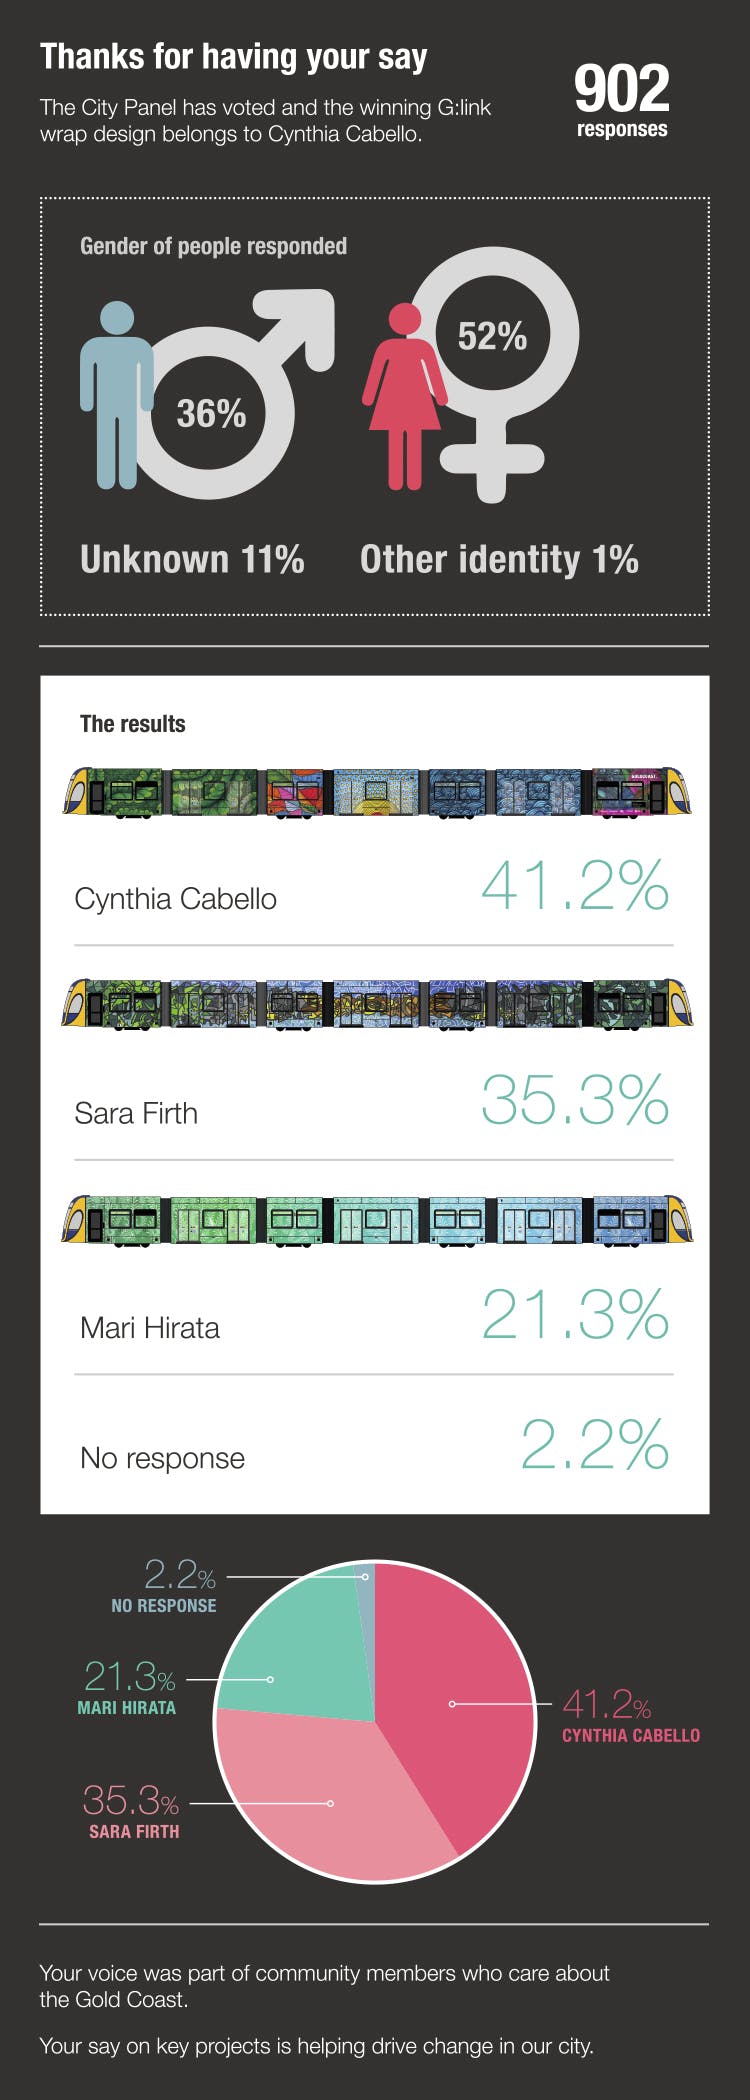 G:link wrap commission engagement results infographic